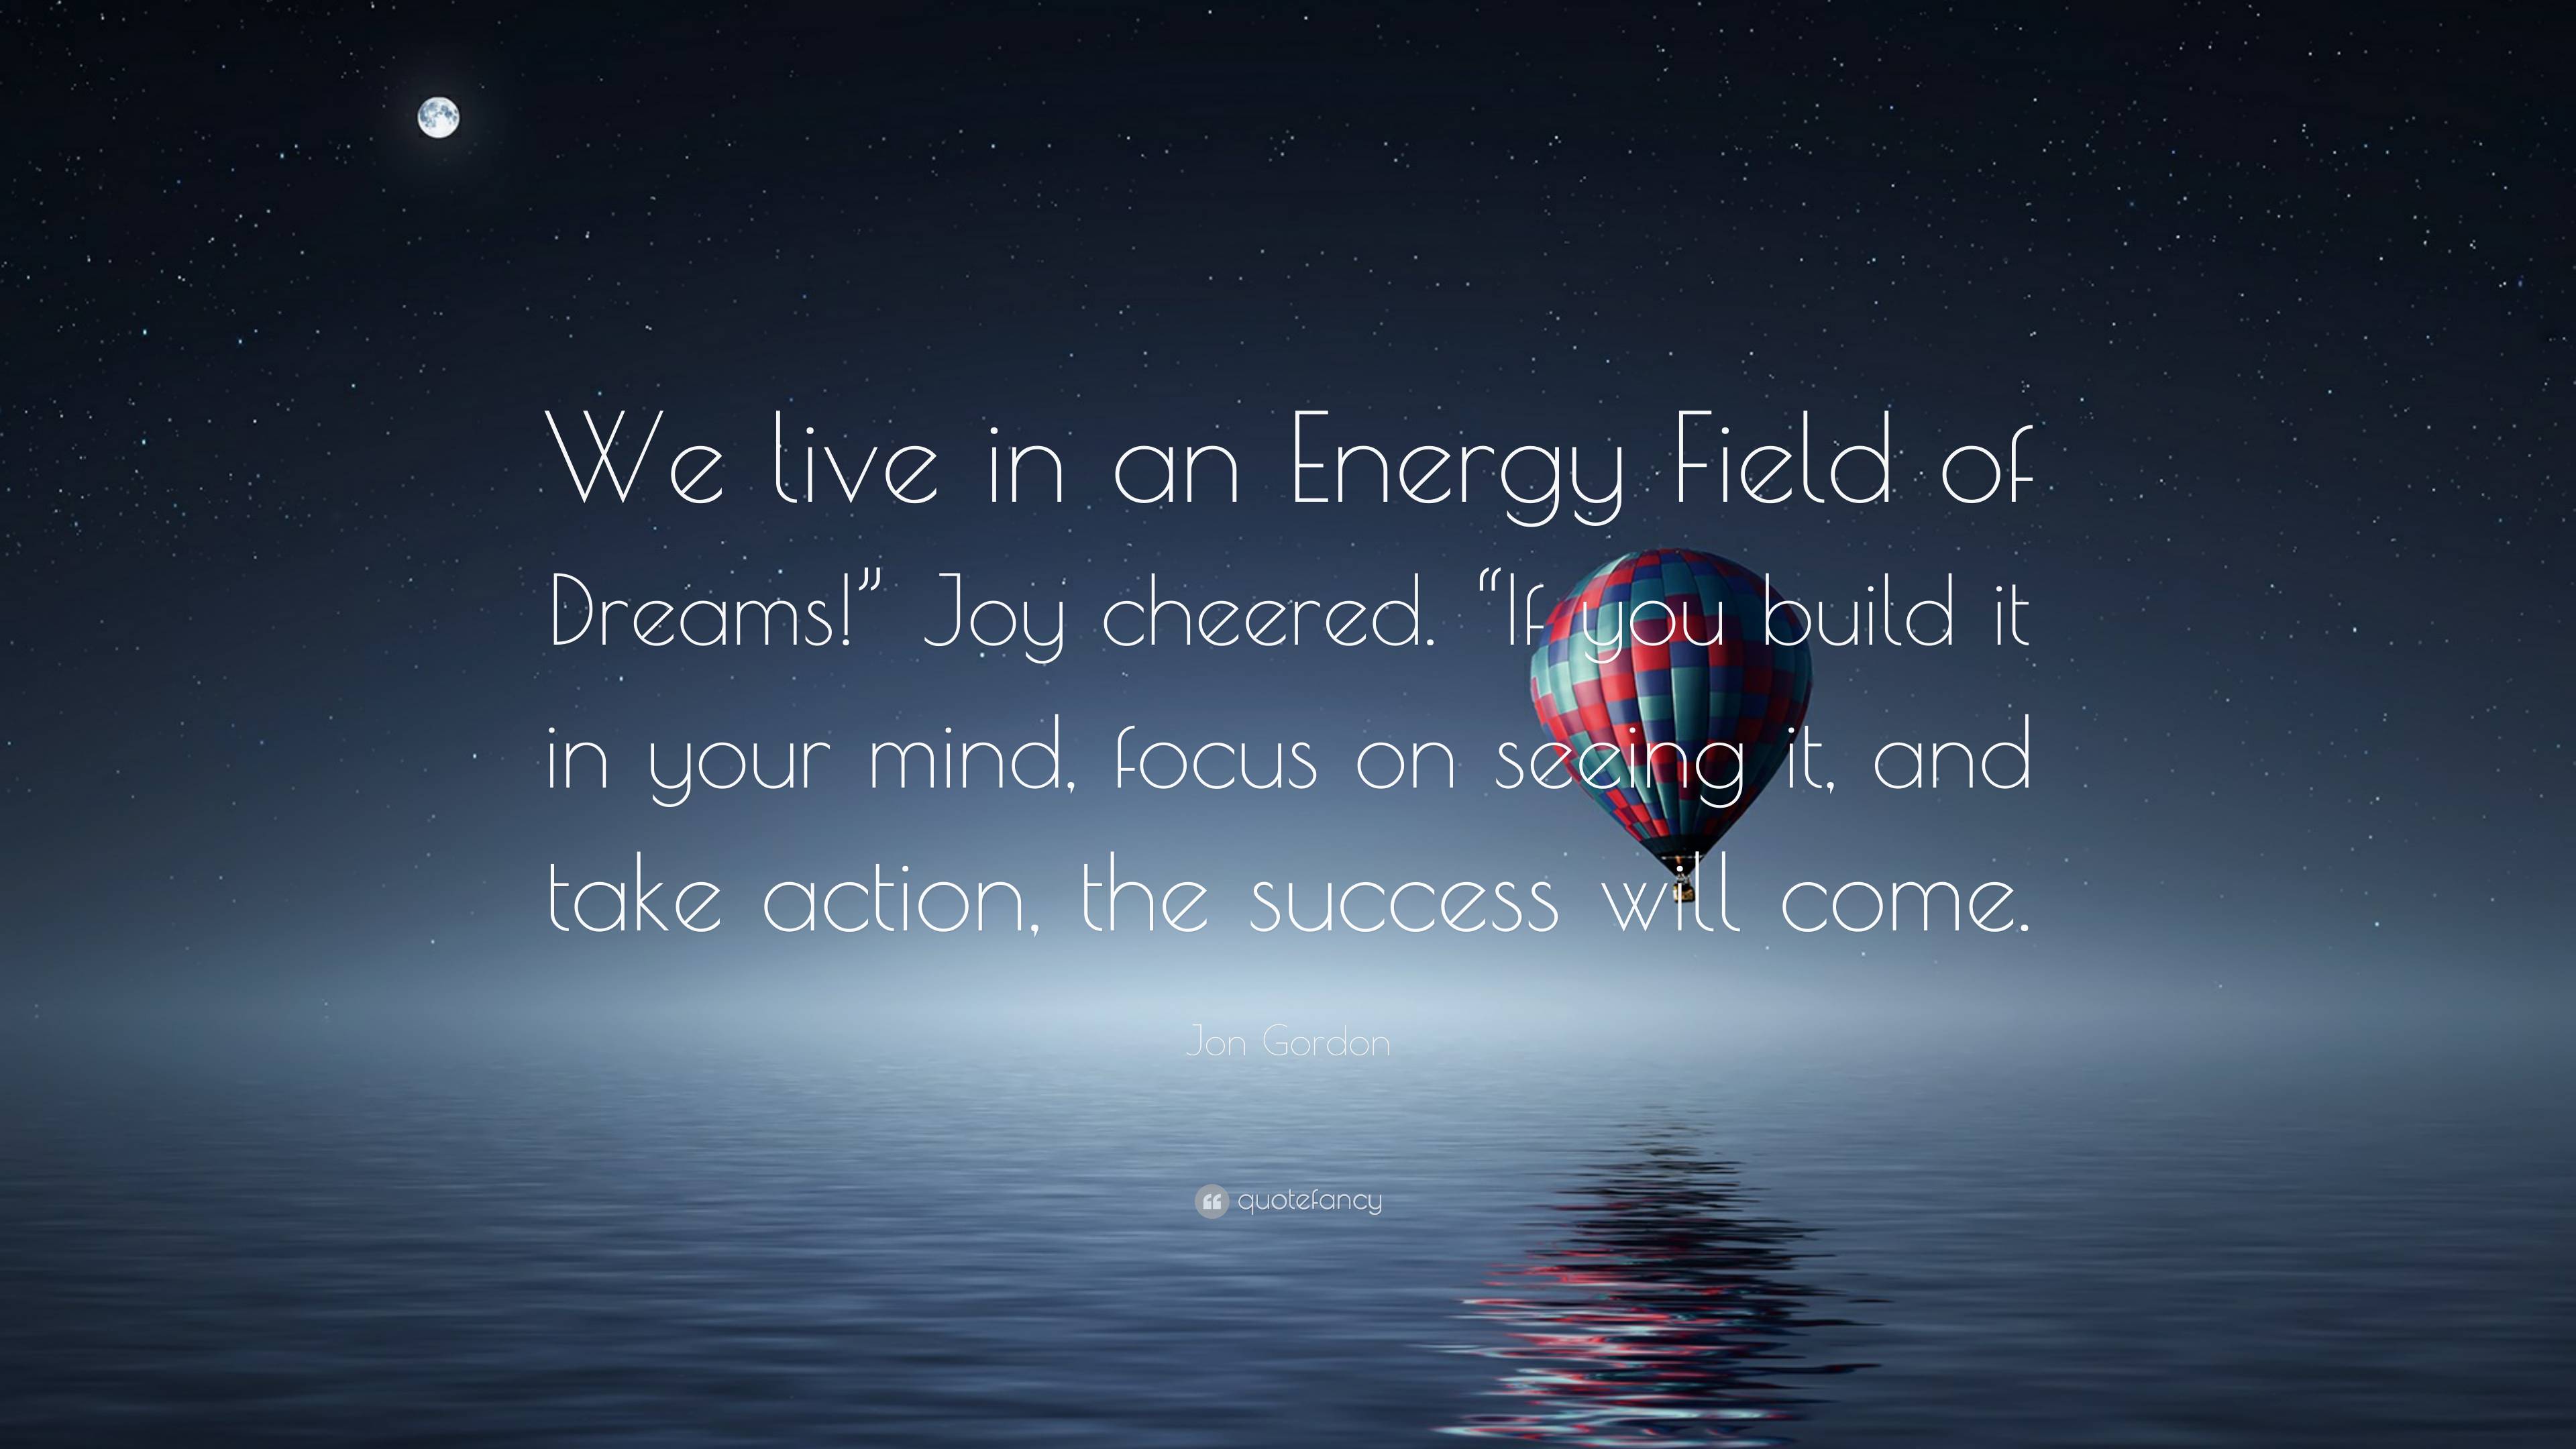 Jon Gordon Quote: “We live in an Energy Field of Dreams!” Joy cheered. “If  you build it in your mind, focus on seeing it, and take action, ”